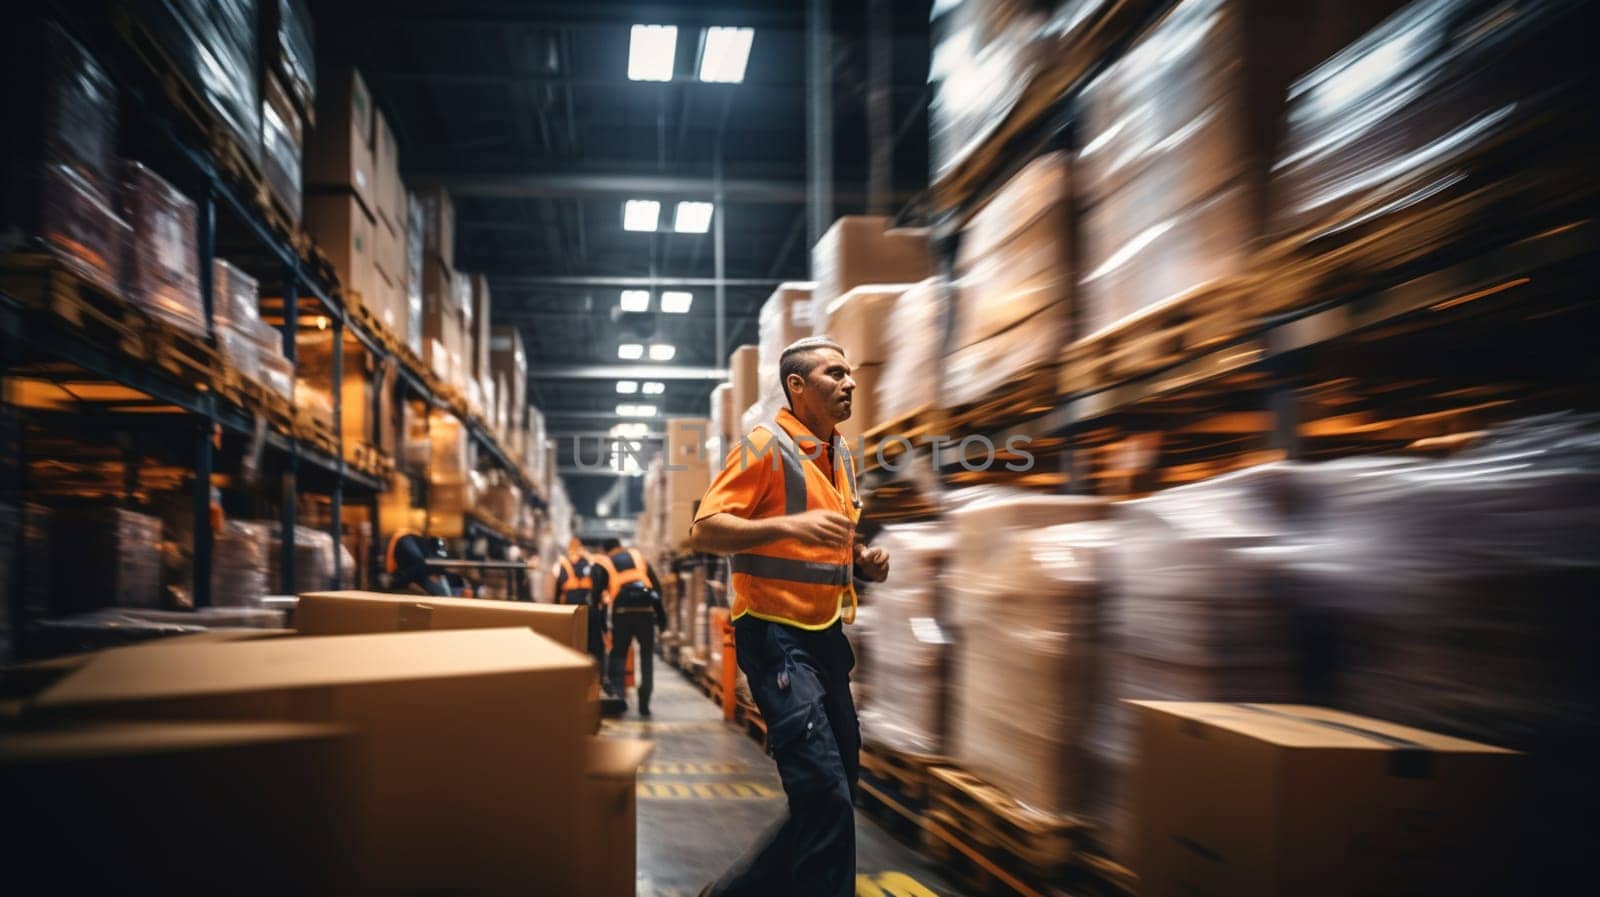 Logistics business warehouse, shipment and loading concept. workers in reflective vests blurred with movement. Staff in a warehouse move between storage racks, motion blur background transport by Andelov13